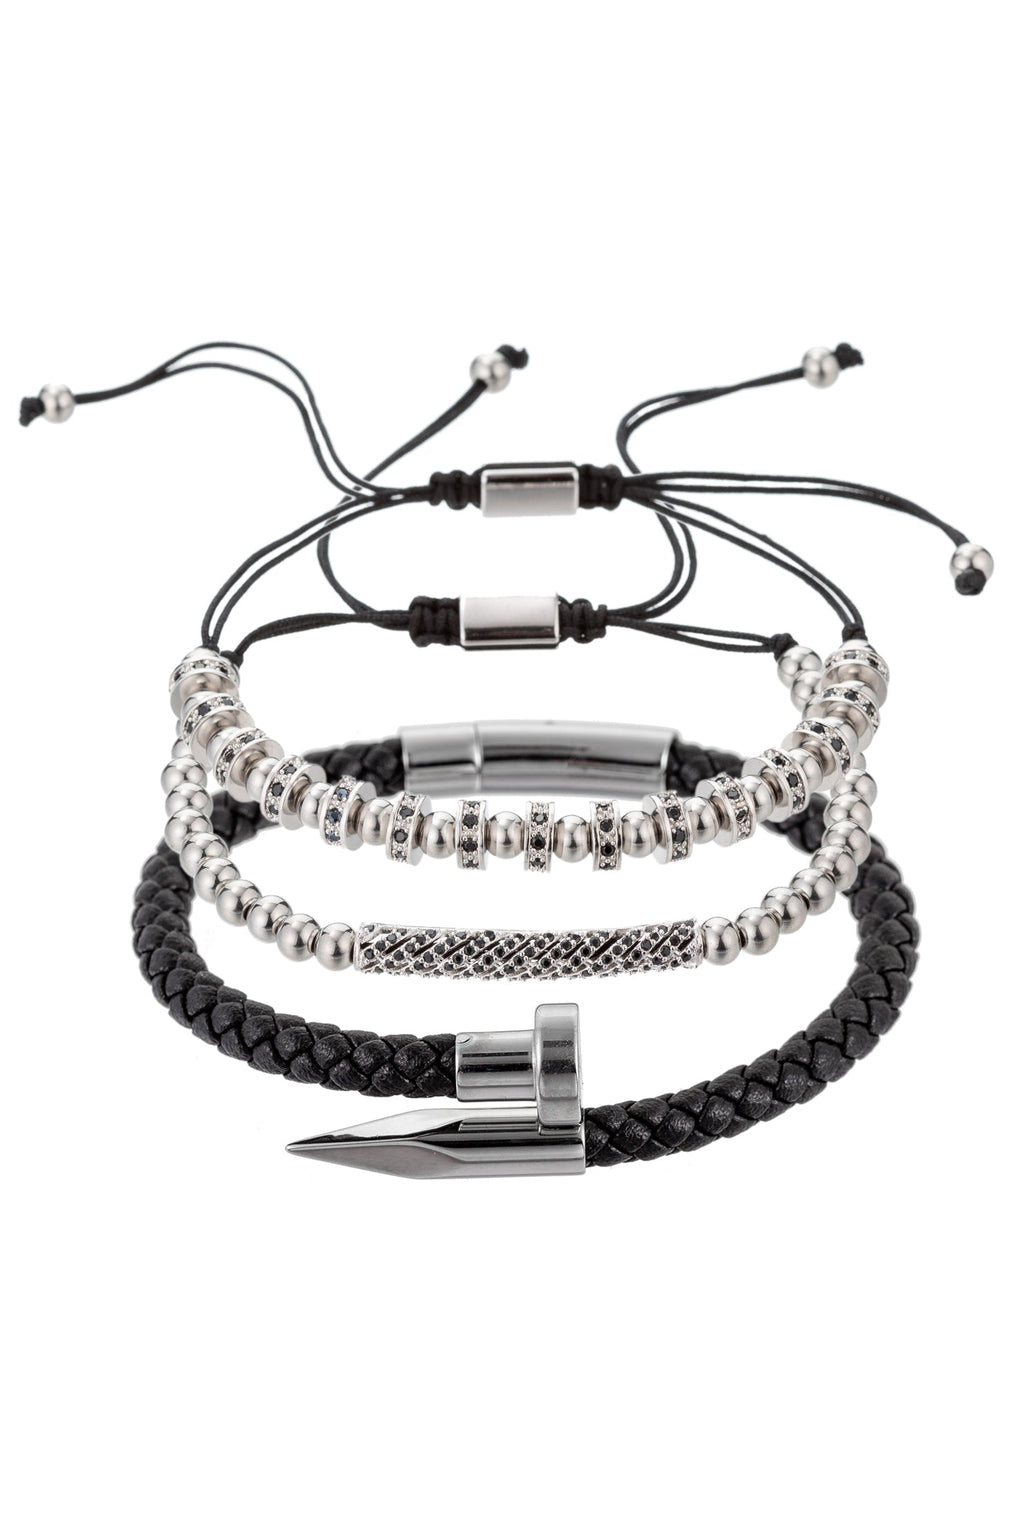 Solomun 3 Piece Leather and Brass Beaded Bracelet Set: A Perfect Blend of Fashion and Sophistication.